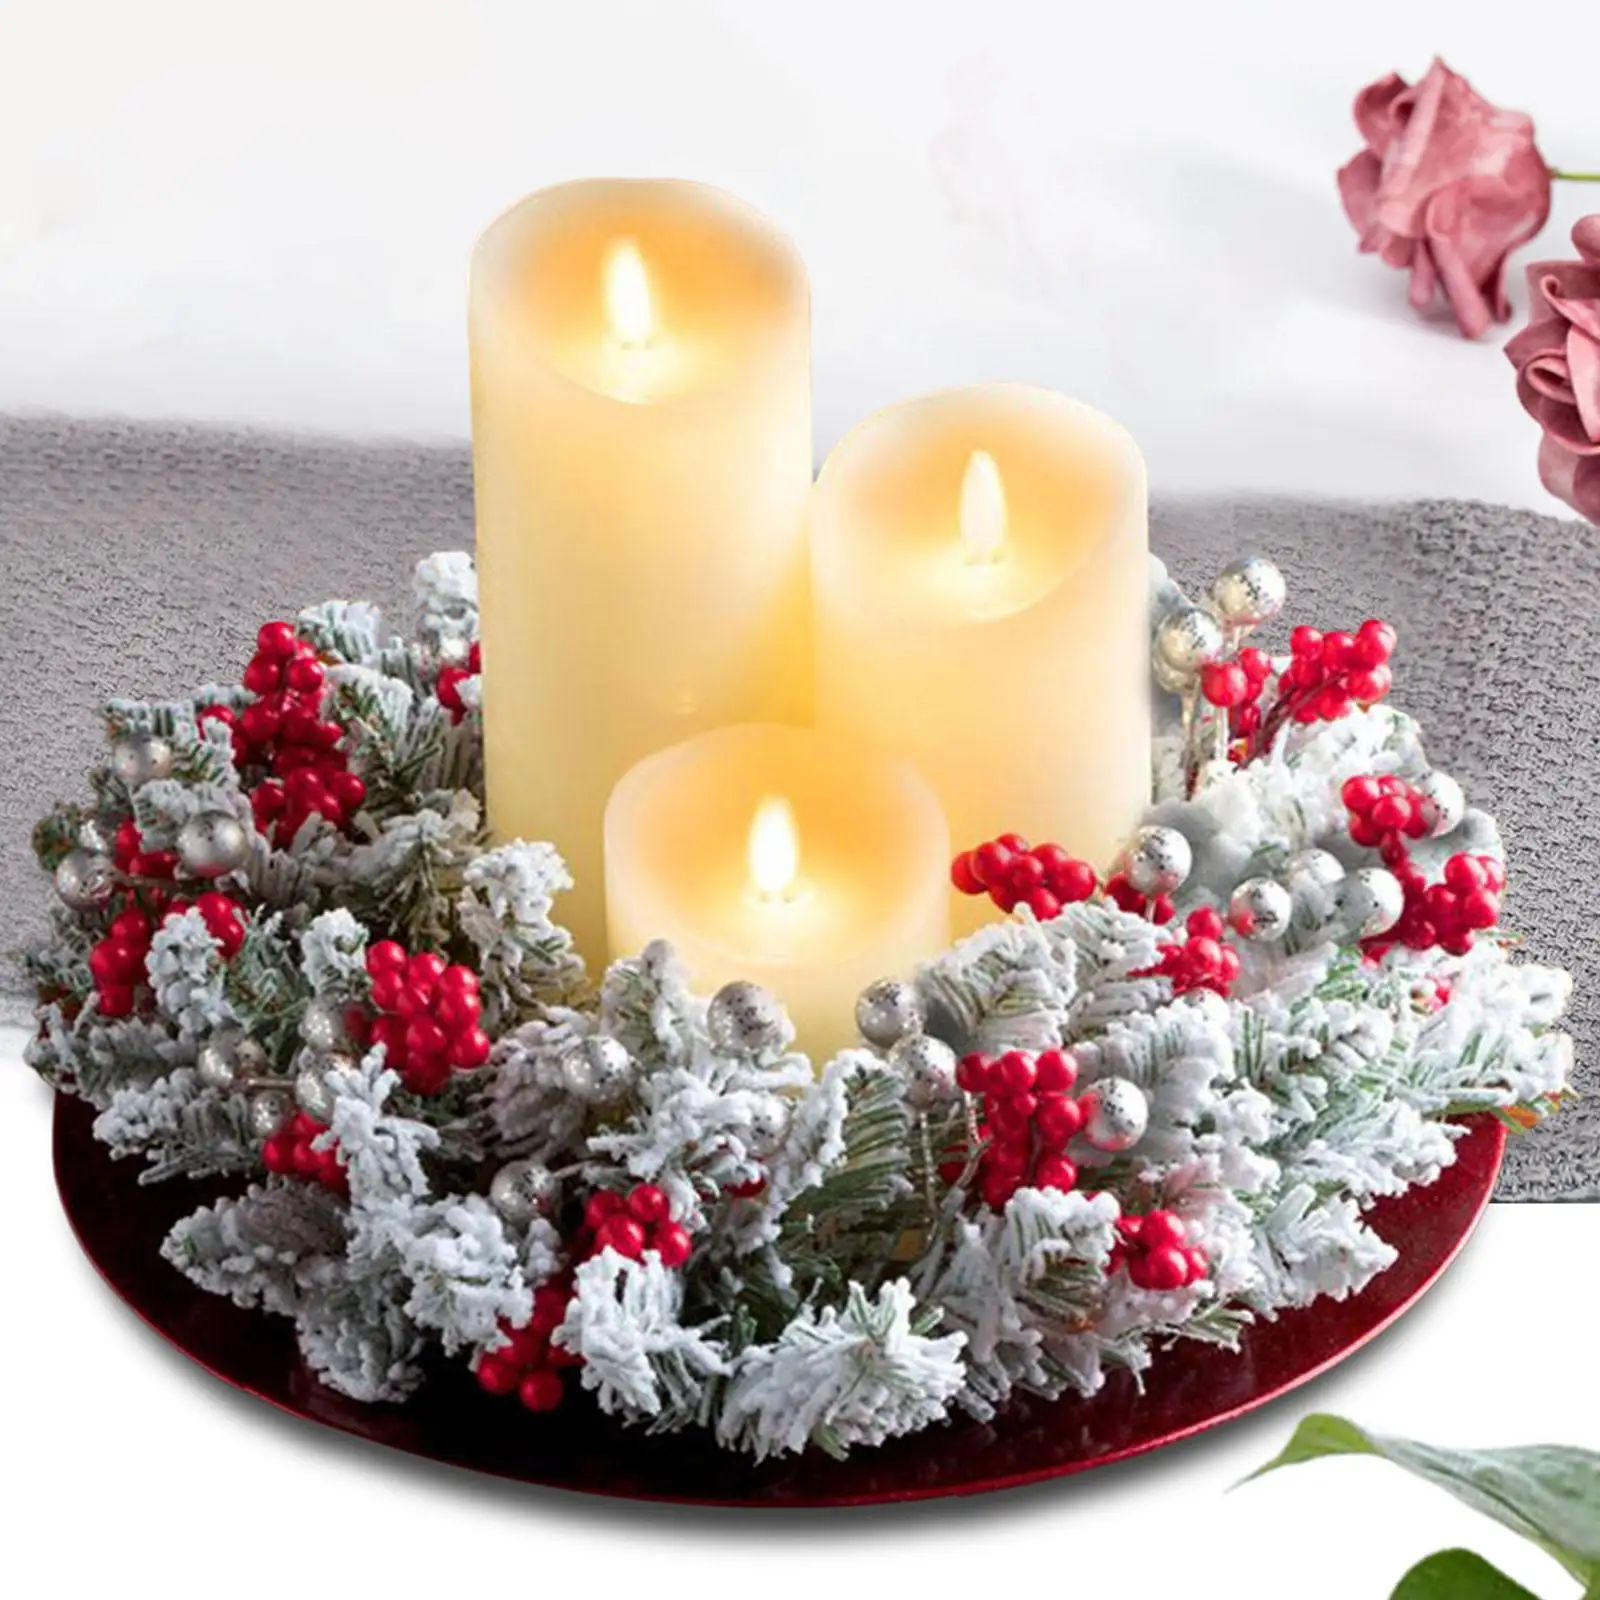 Candle Rings Candles Pillar Creative Candlestick Decorative Rustic Garland Wreath for Dining Table Living Room Parties Home Door